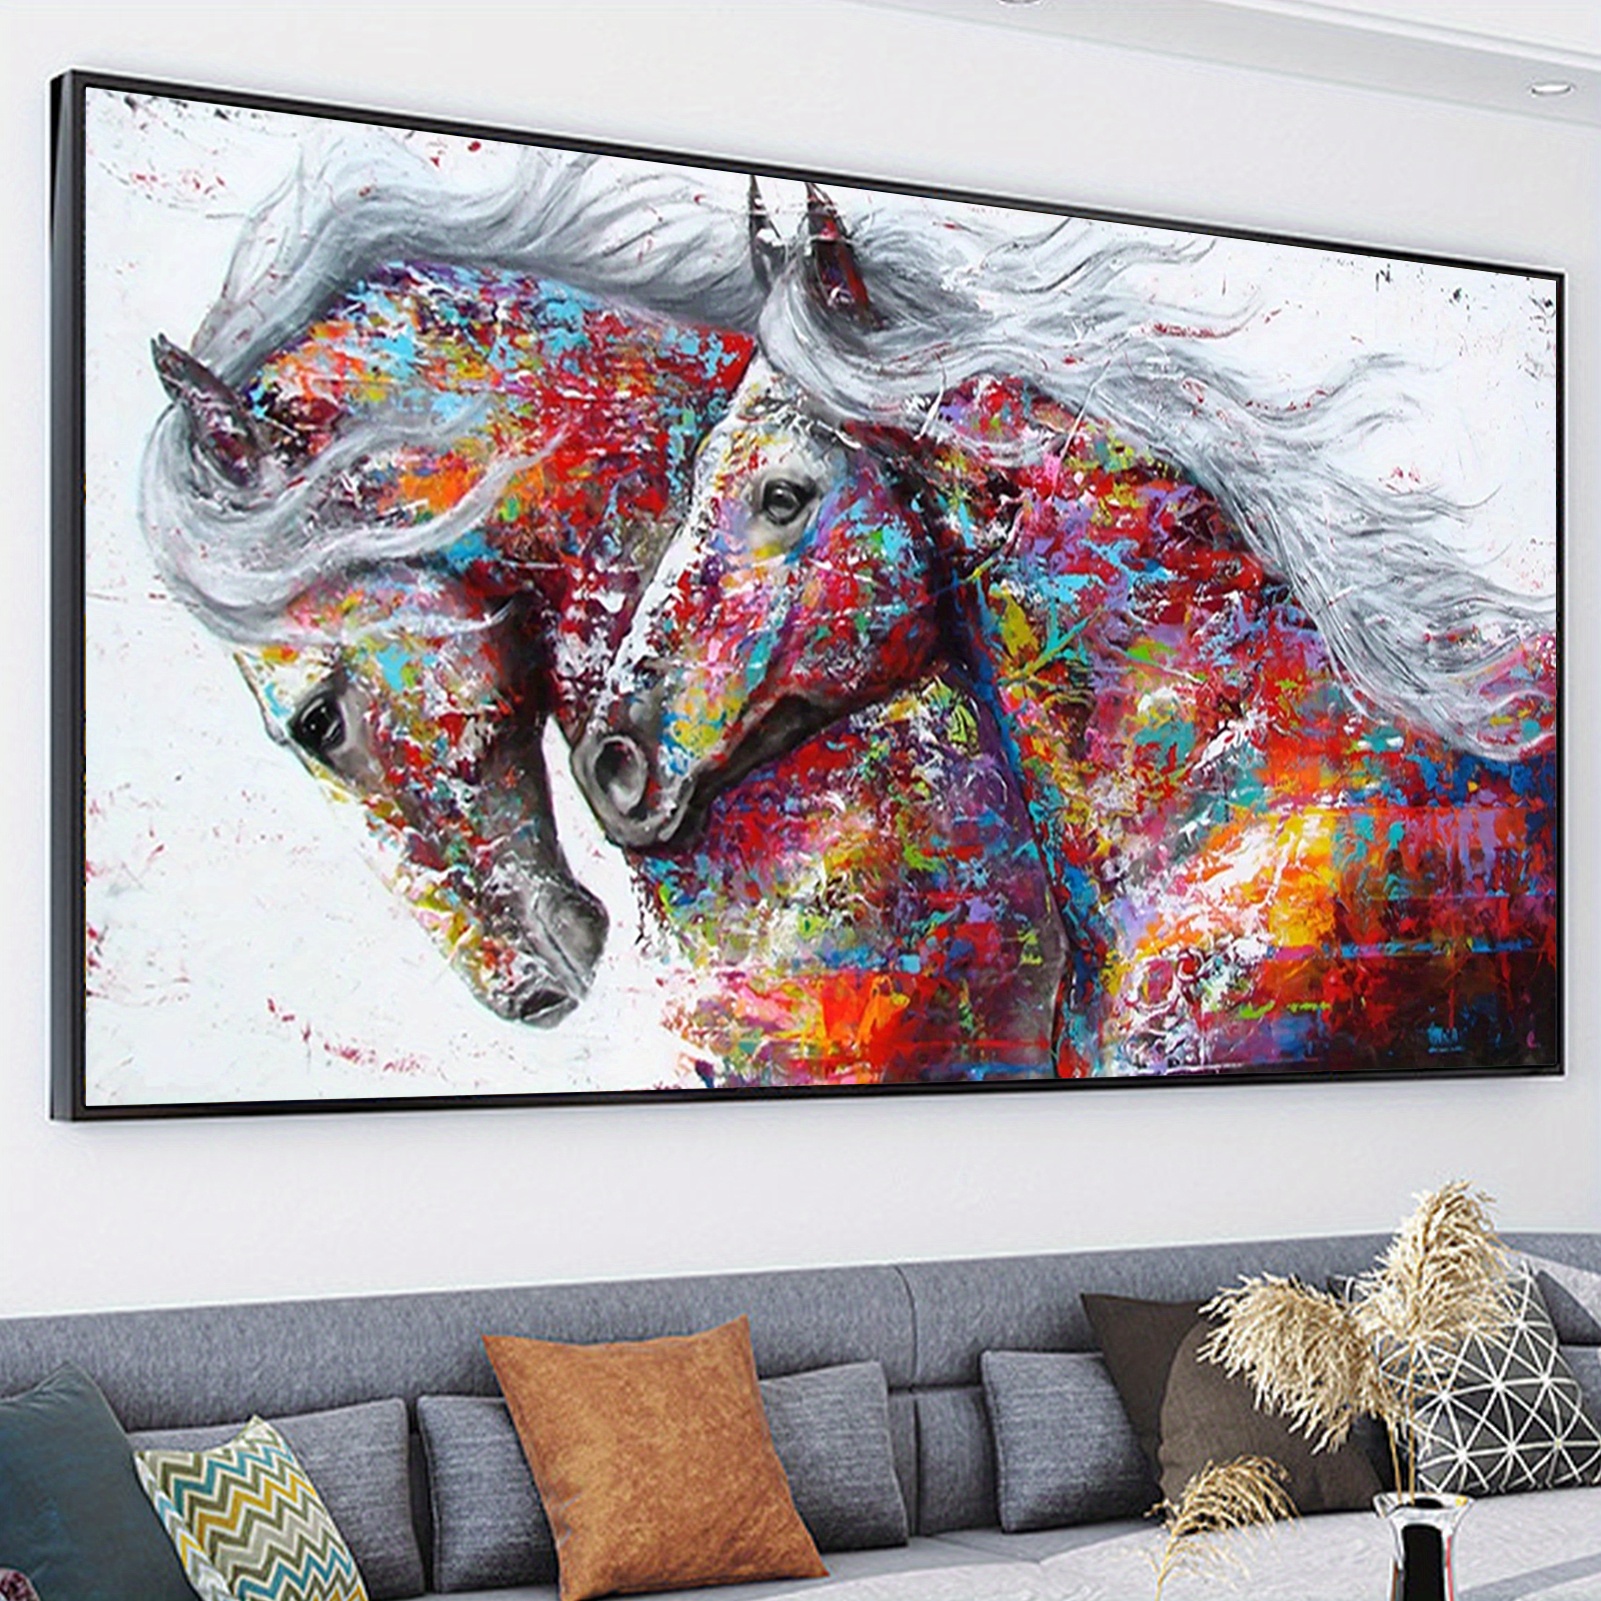 5D DIY Large Diamond Painting Kits,15.7x27.5inch/40x70cm A Running Horse  Round Full Diamond Diamond Art Kits Picture By Number Kits For Home Wall  Deco